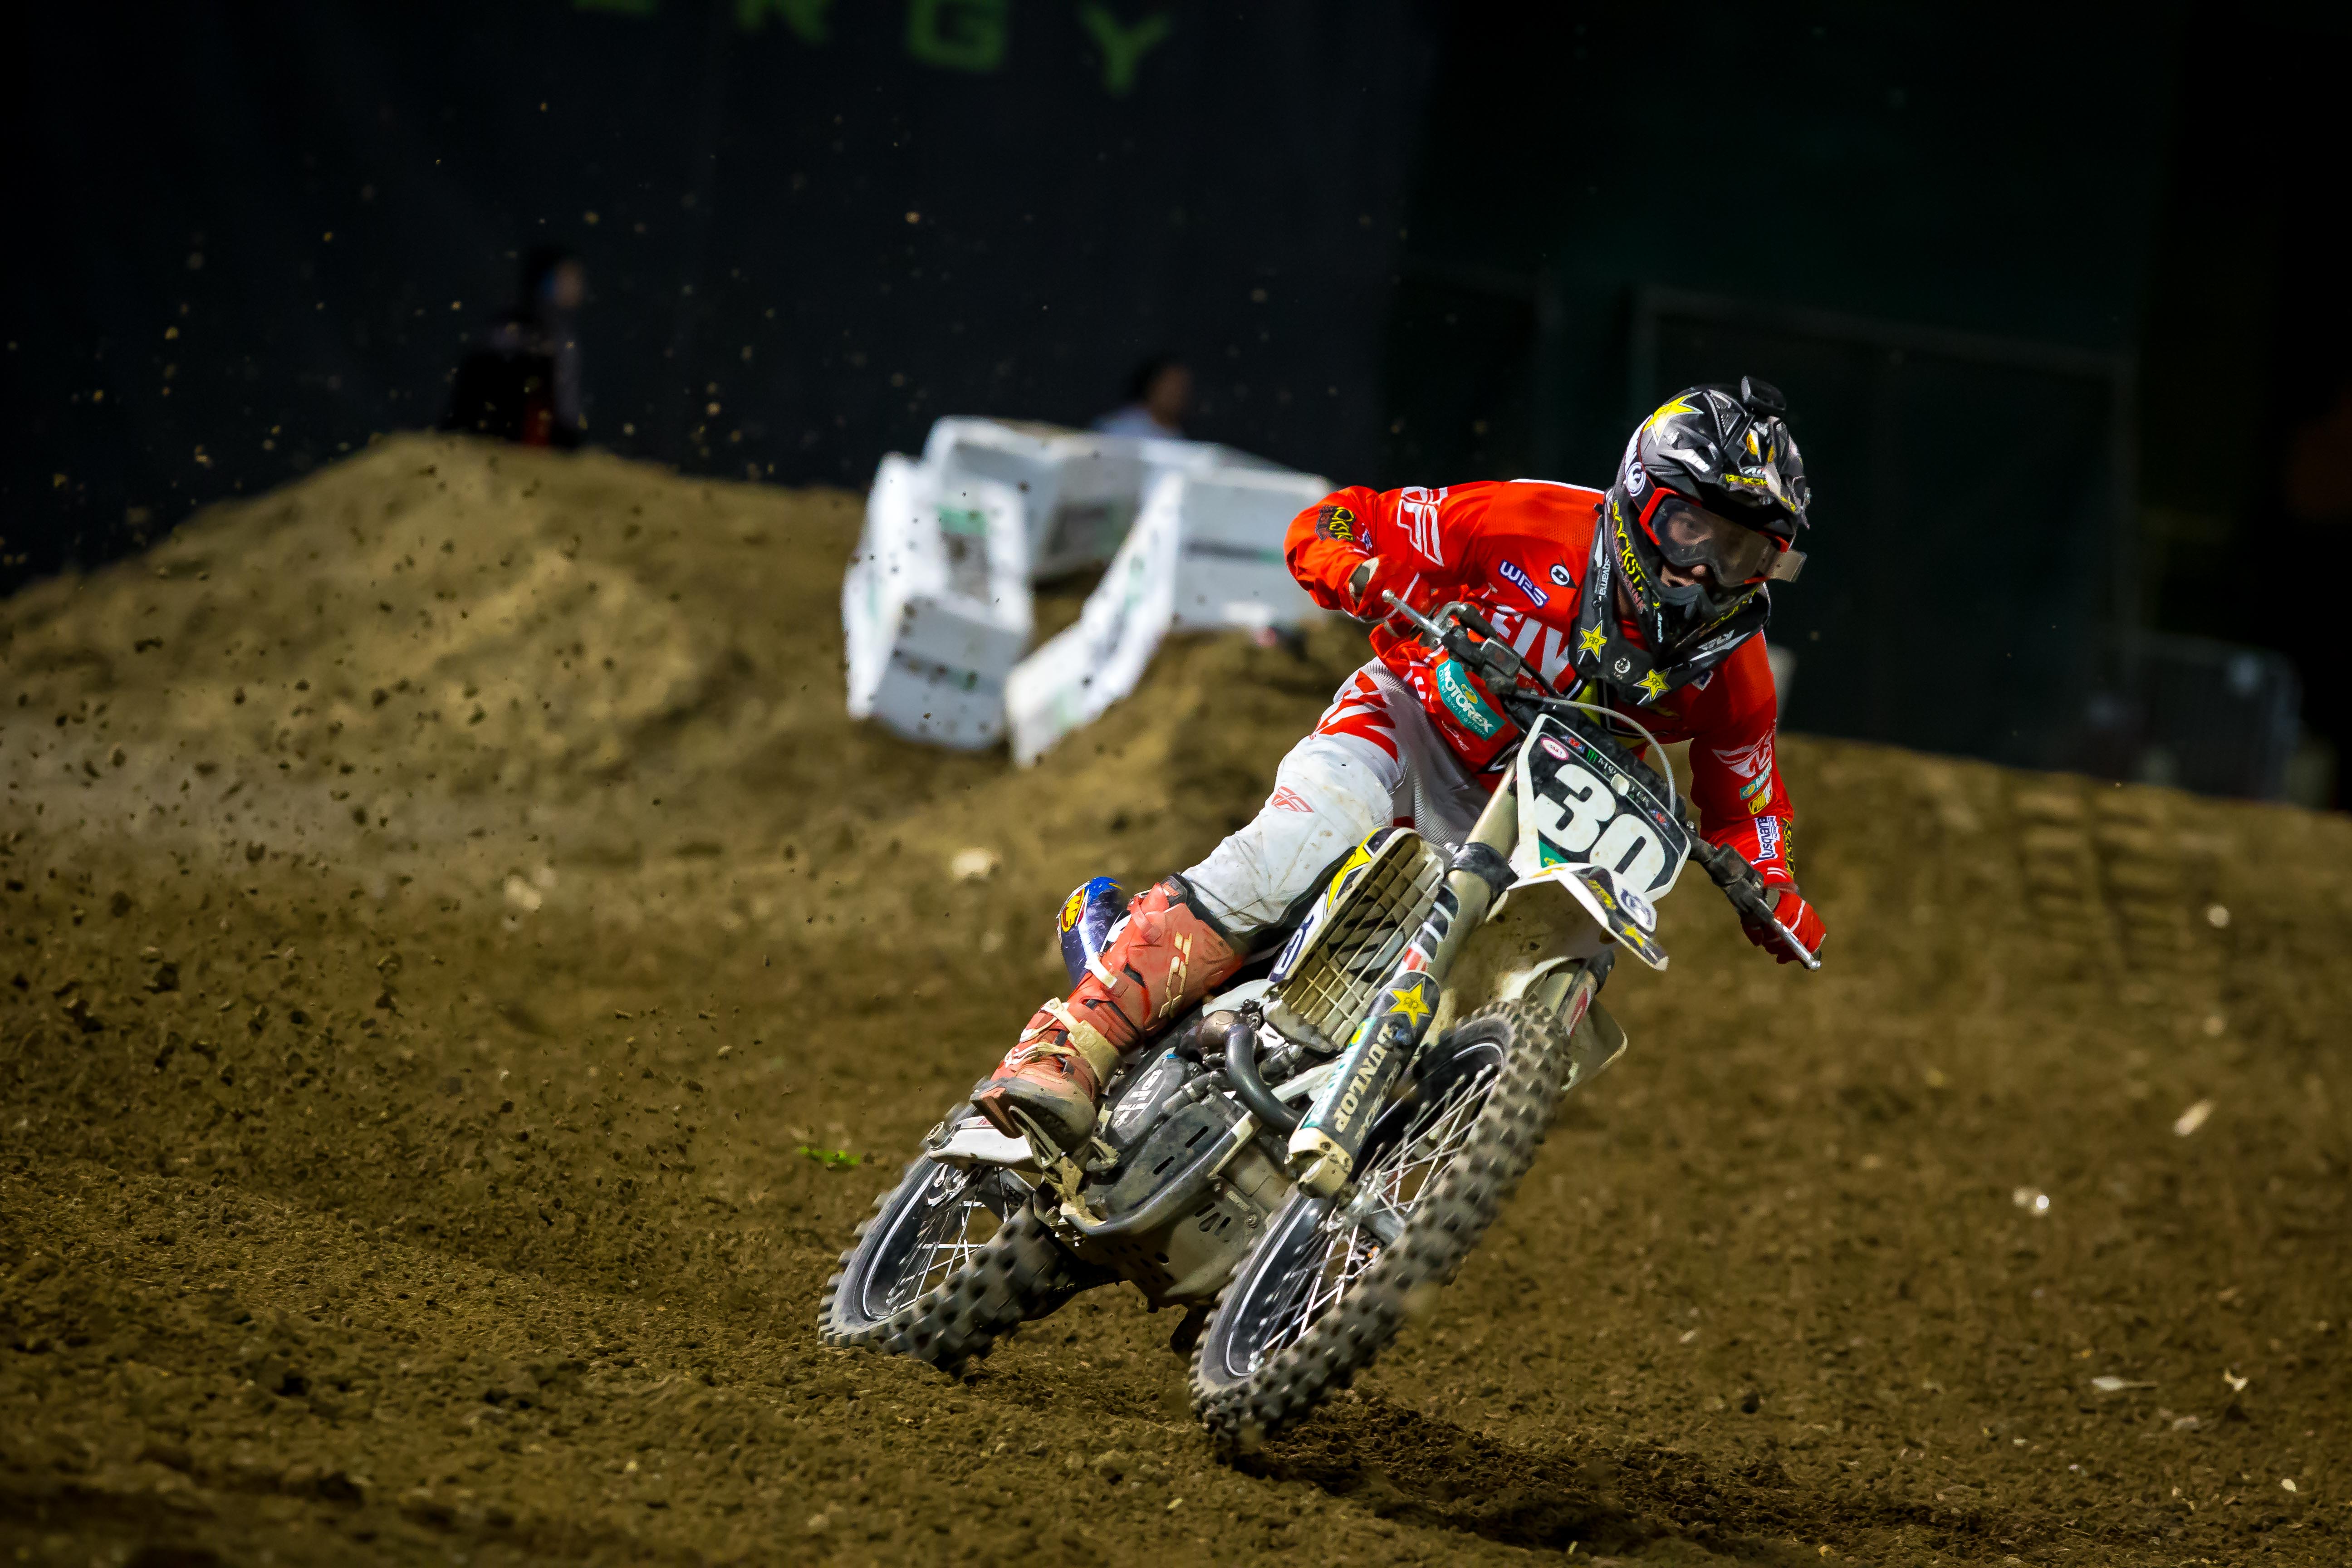 Mitchell Harrison finished 9th in the 250 class in Oakland. (Photo: Simon Cudby)